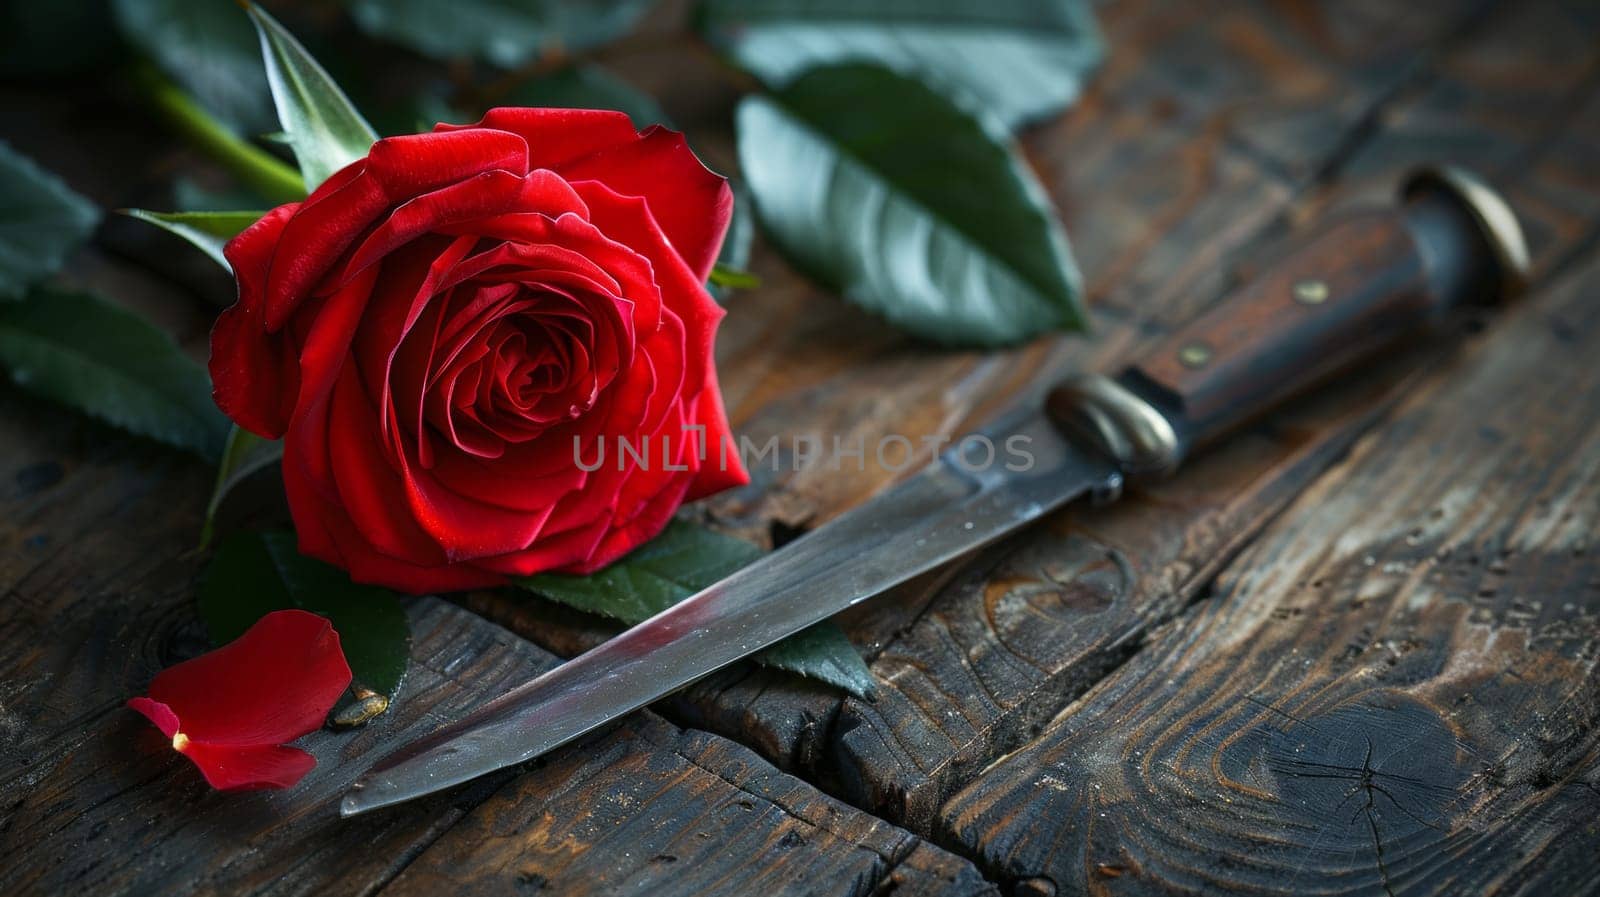 A knife and a red rose on the table with leaves, AI by starush